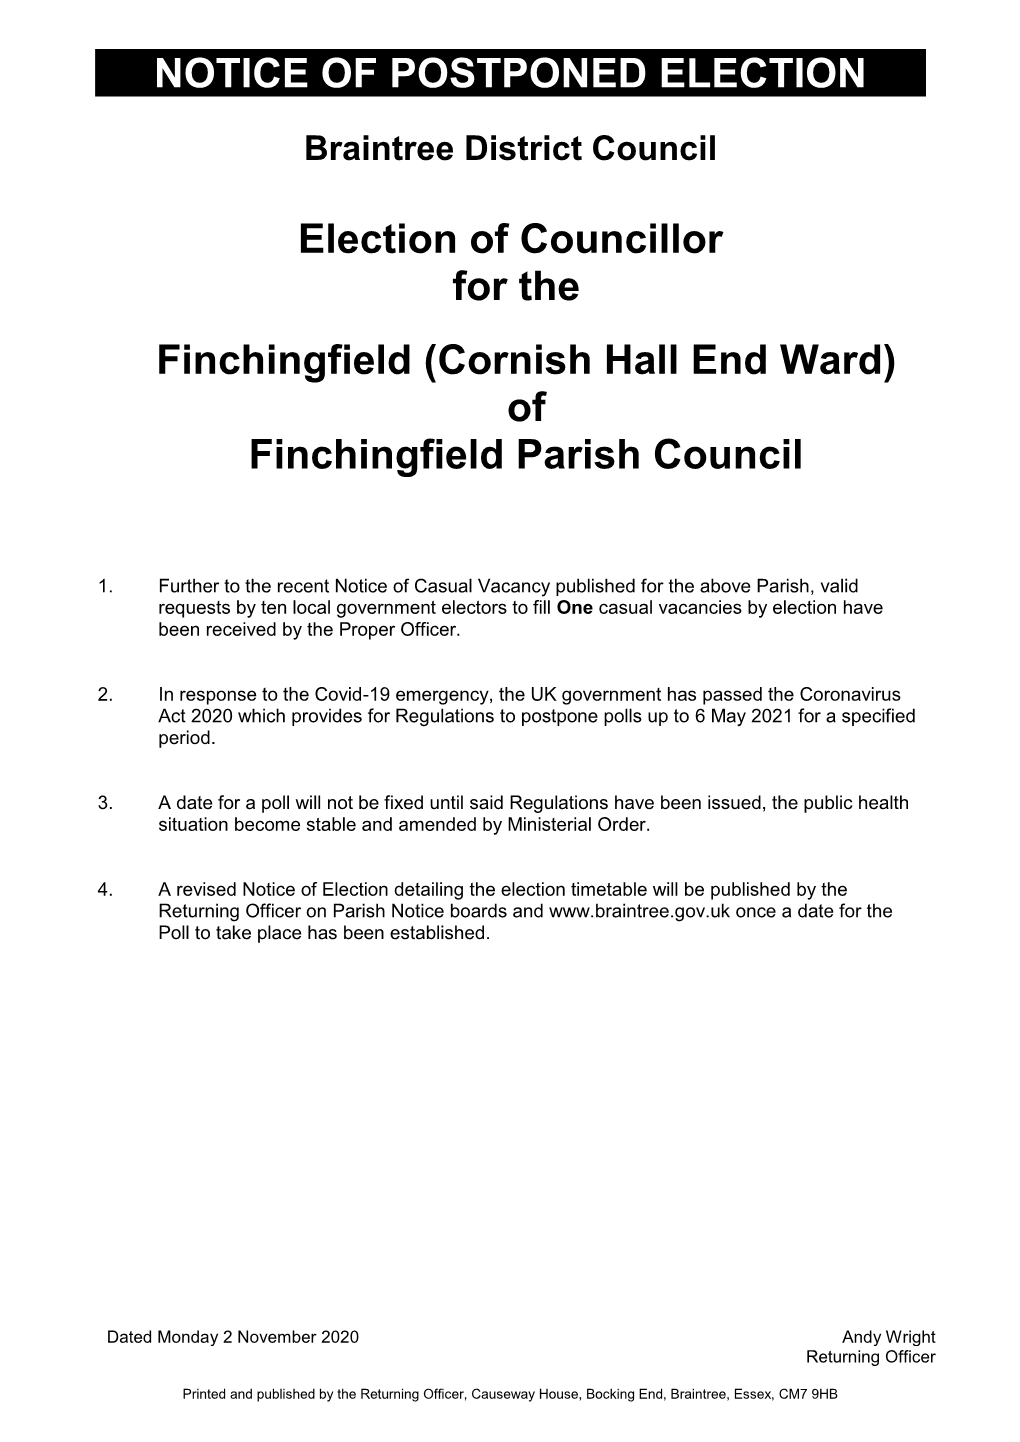 Election of Councillor for the Finchingfield (Cornish Hall End Ward) of Finchingfield Parish Council